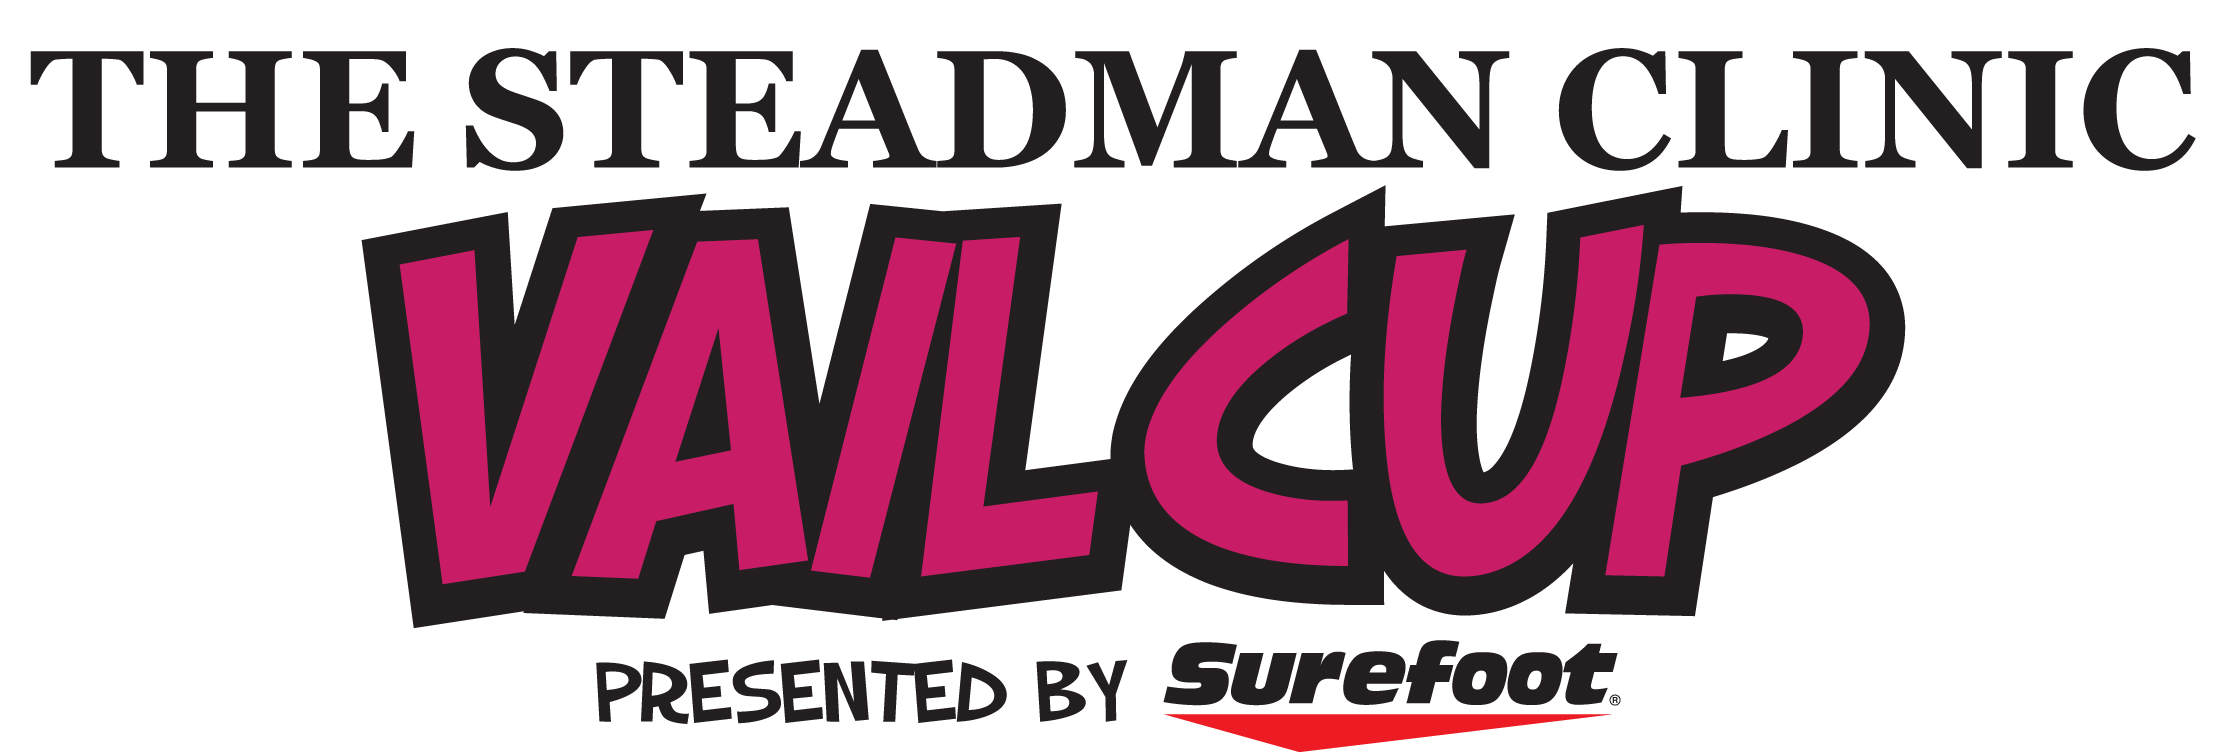 2015 The Steadman Clinic Vail Cup Registration, Vail